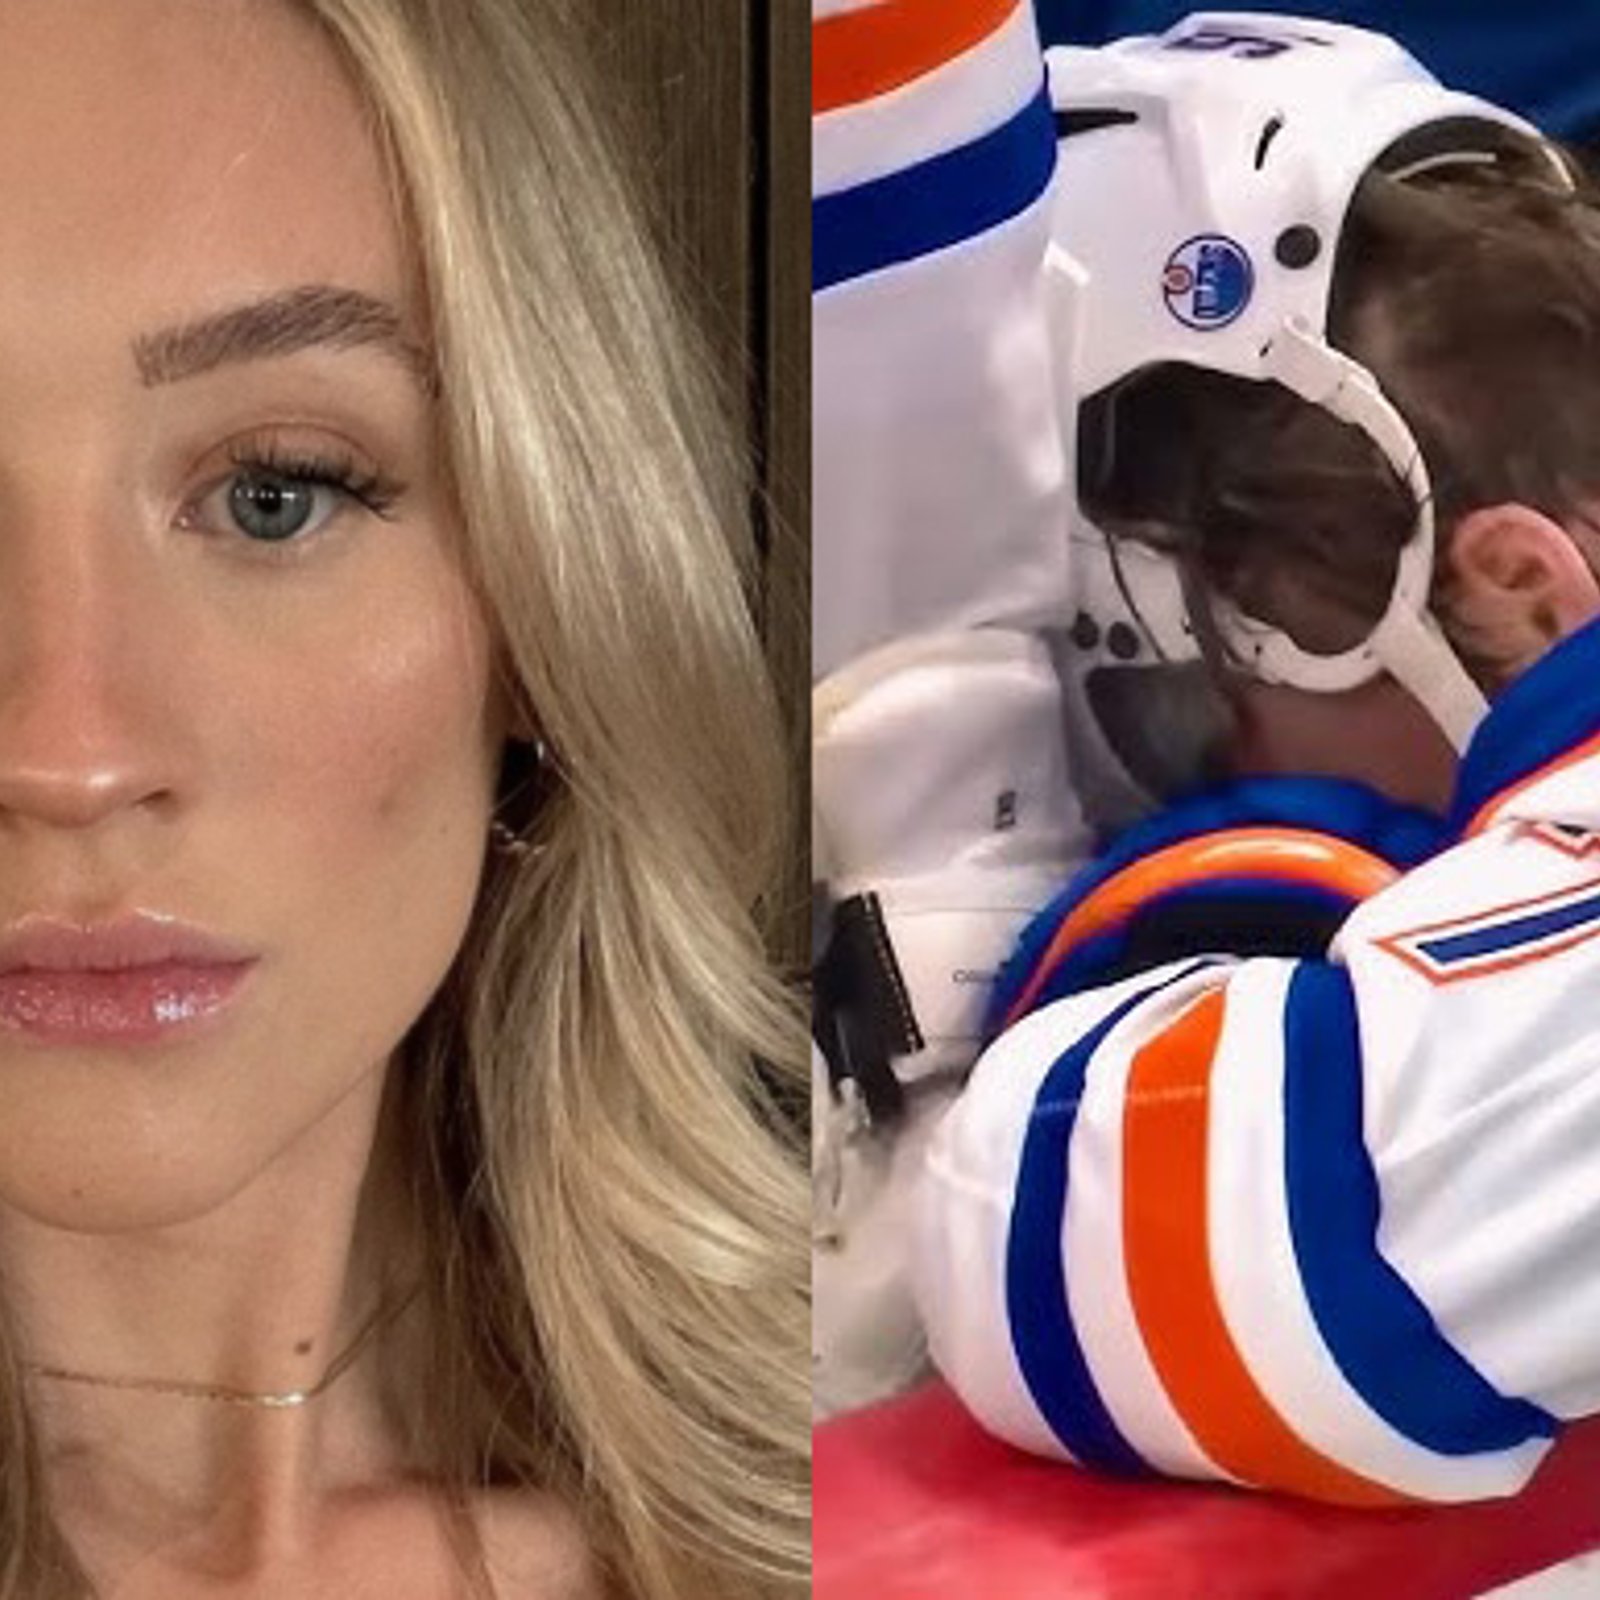 Connor McDavid’s fiancee shares heartbreaking message about her man on Instagram